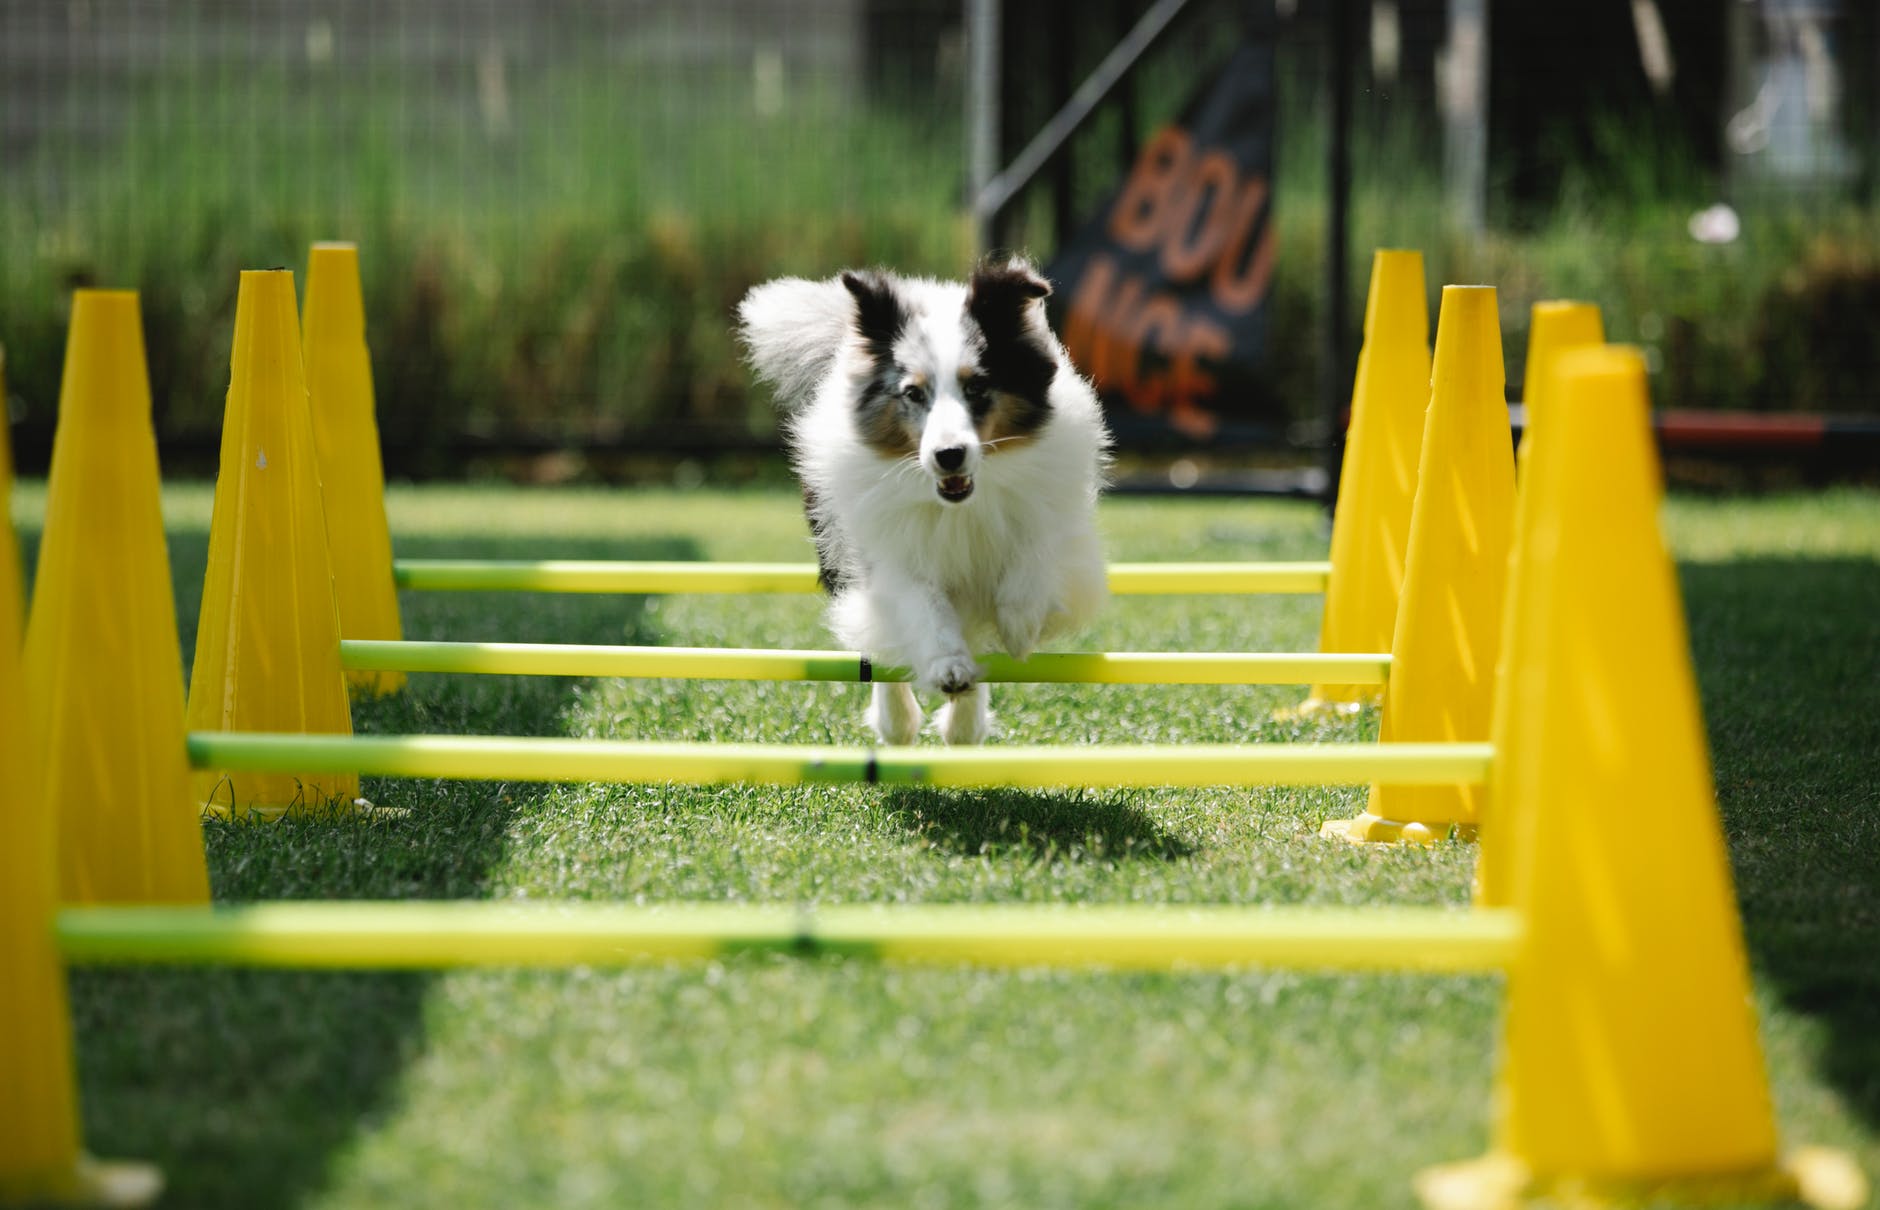 collie jumping over obstacles on lawn in sunlight